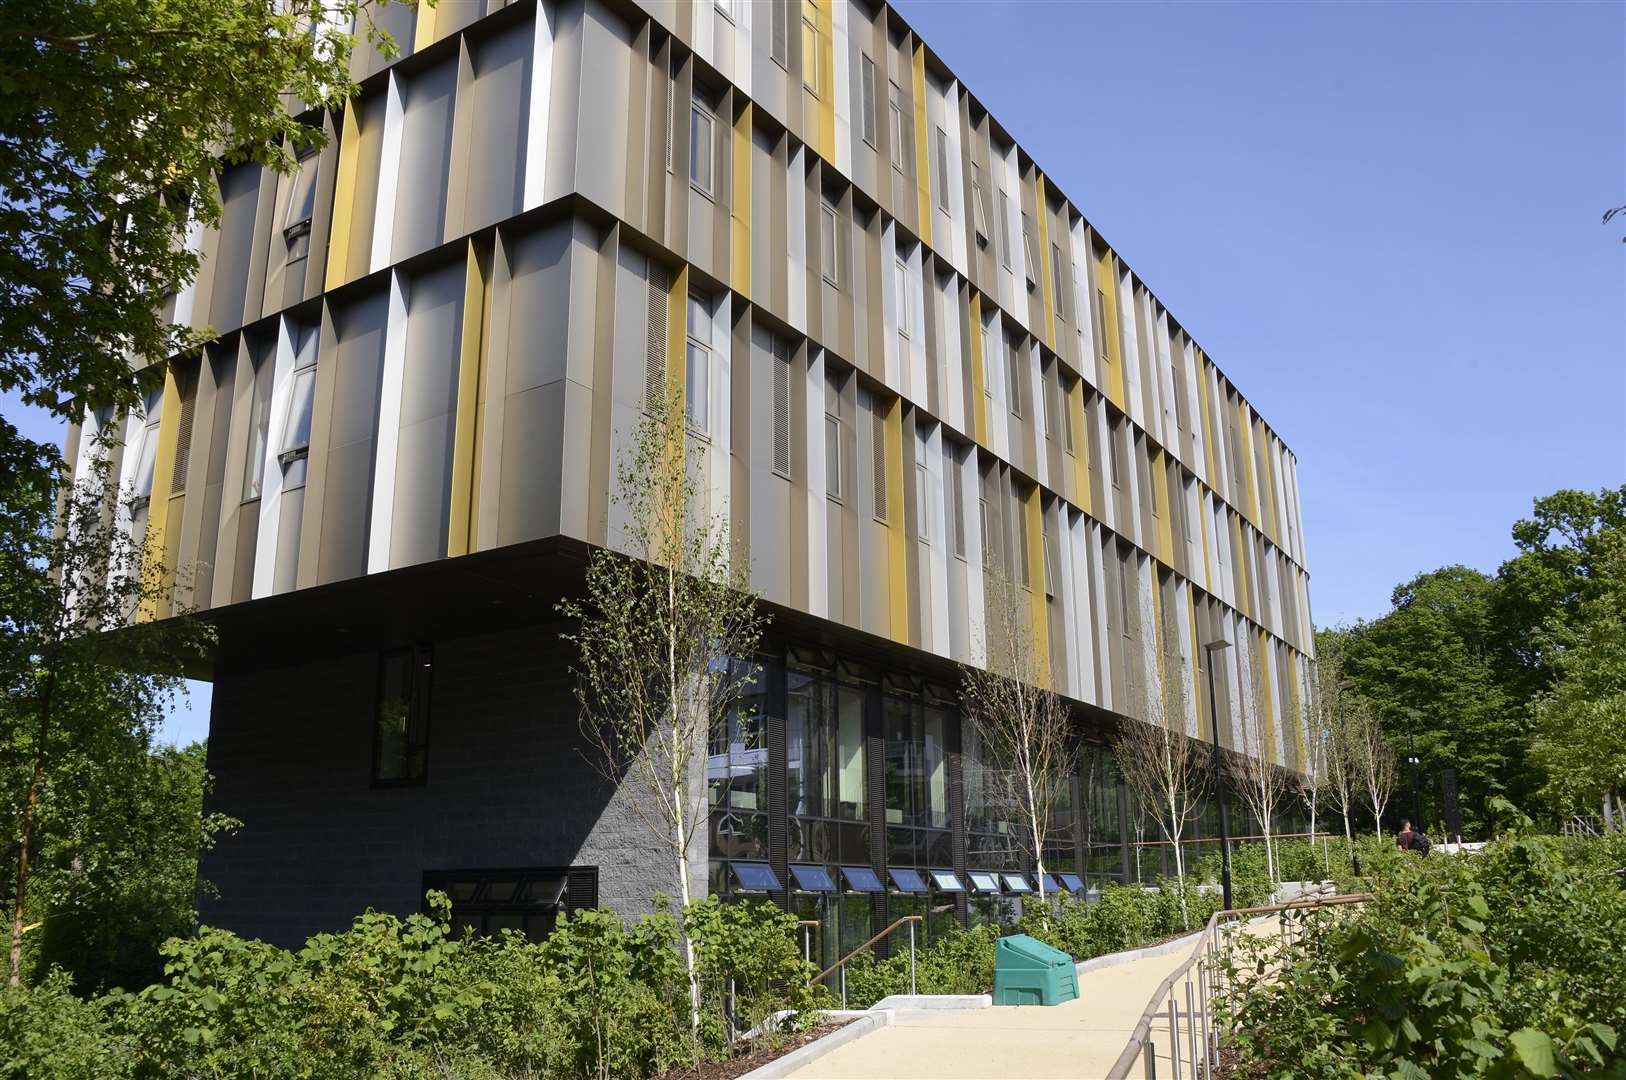 Willmott Dixon built the Sibson Building, which is home to Kent Business School